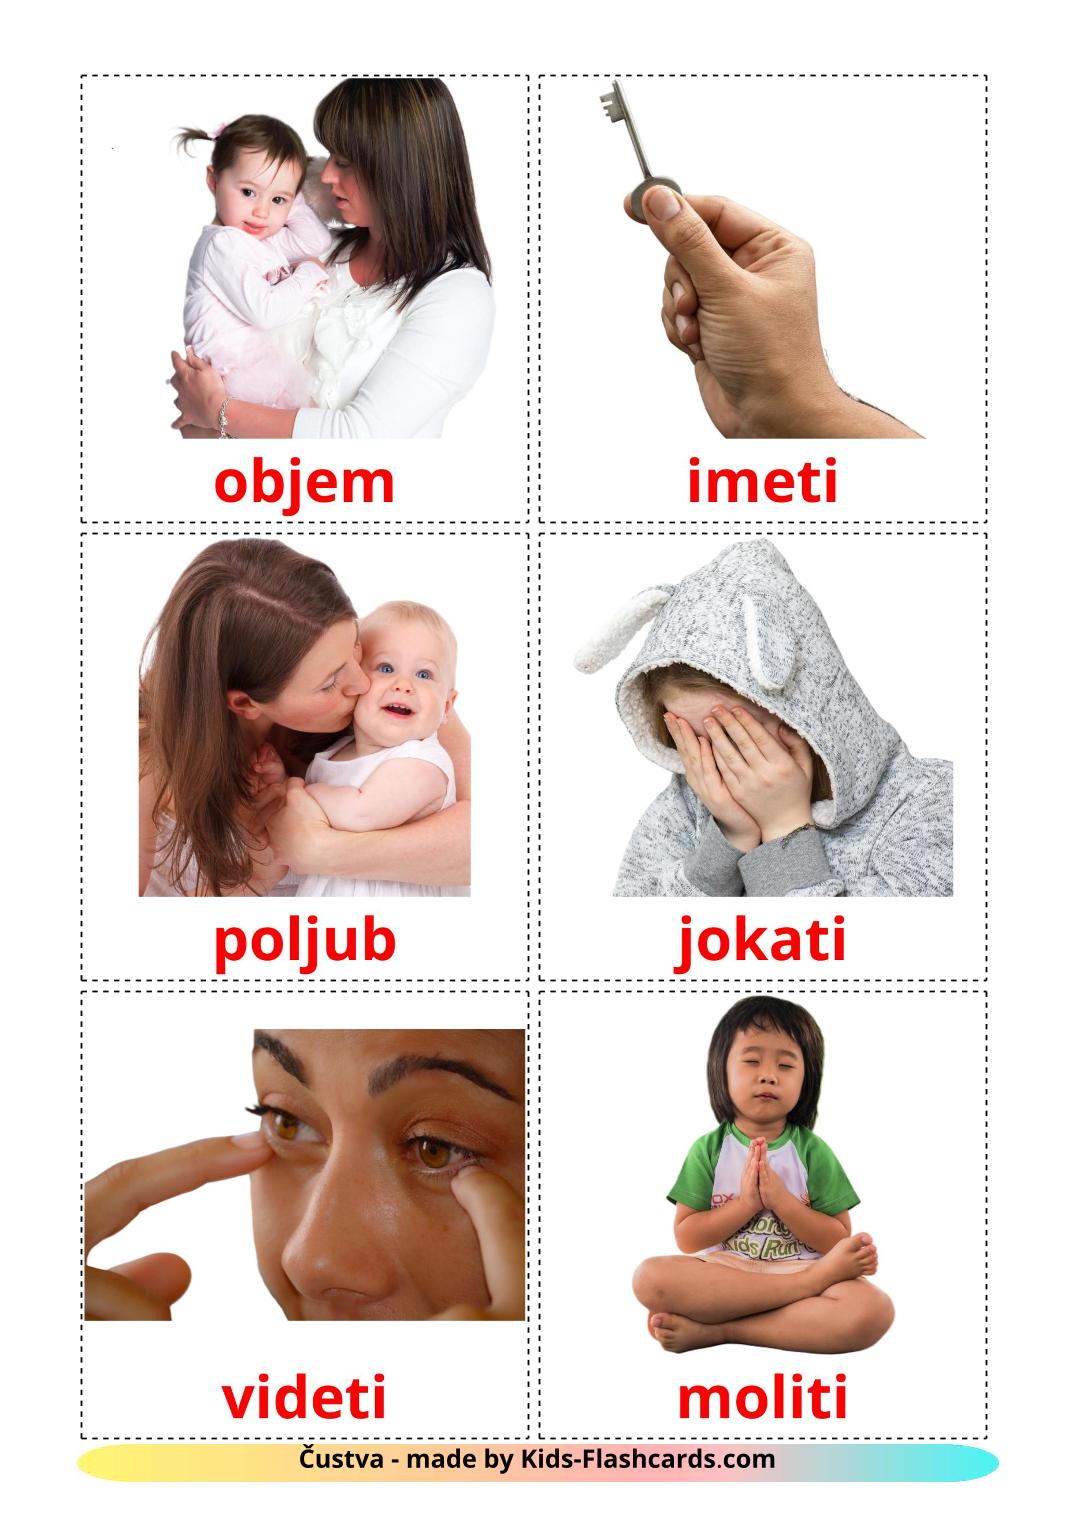 State verbs - 23 Free Printable slovenian Flashcards 